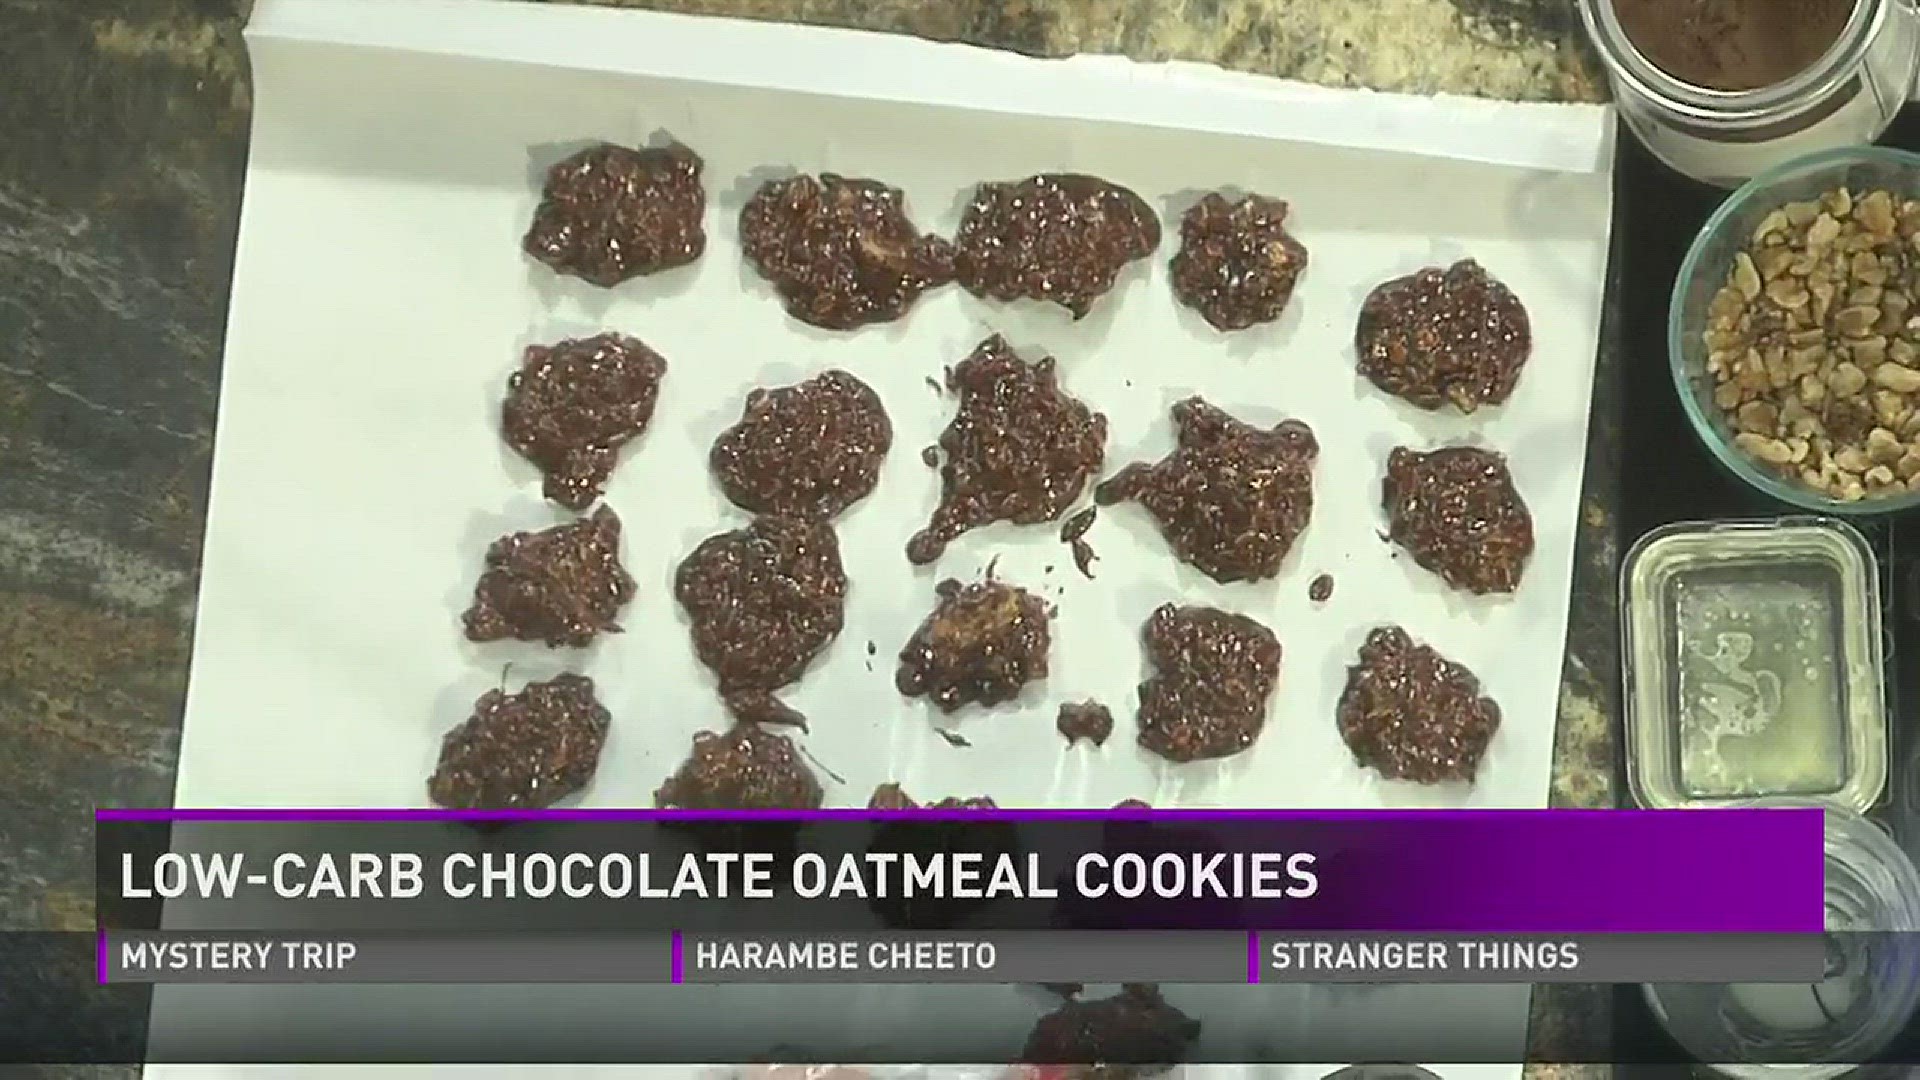 Melissa Graves from Donna's Old Town Cafe joined 10News at Noon to show how to make low-carb chocolate oatmeal cookies.